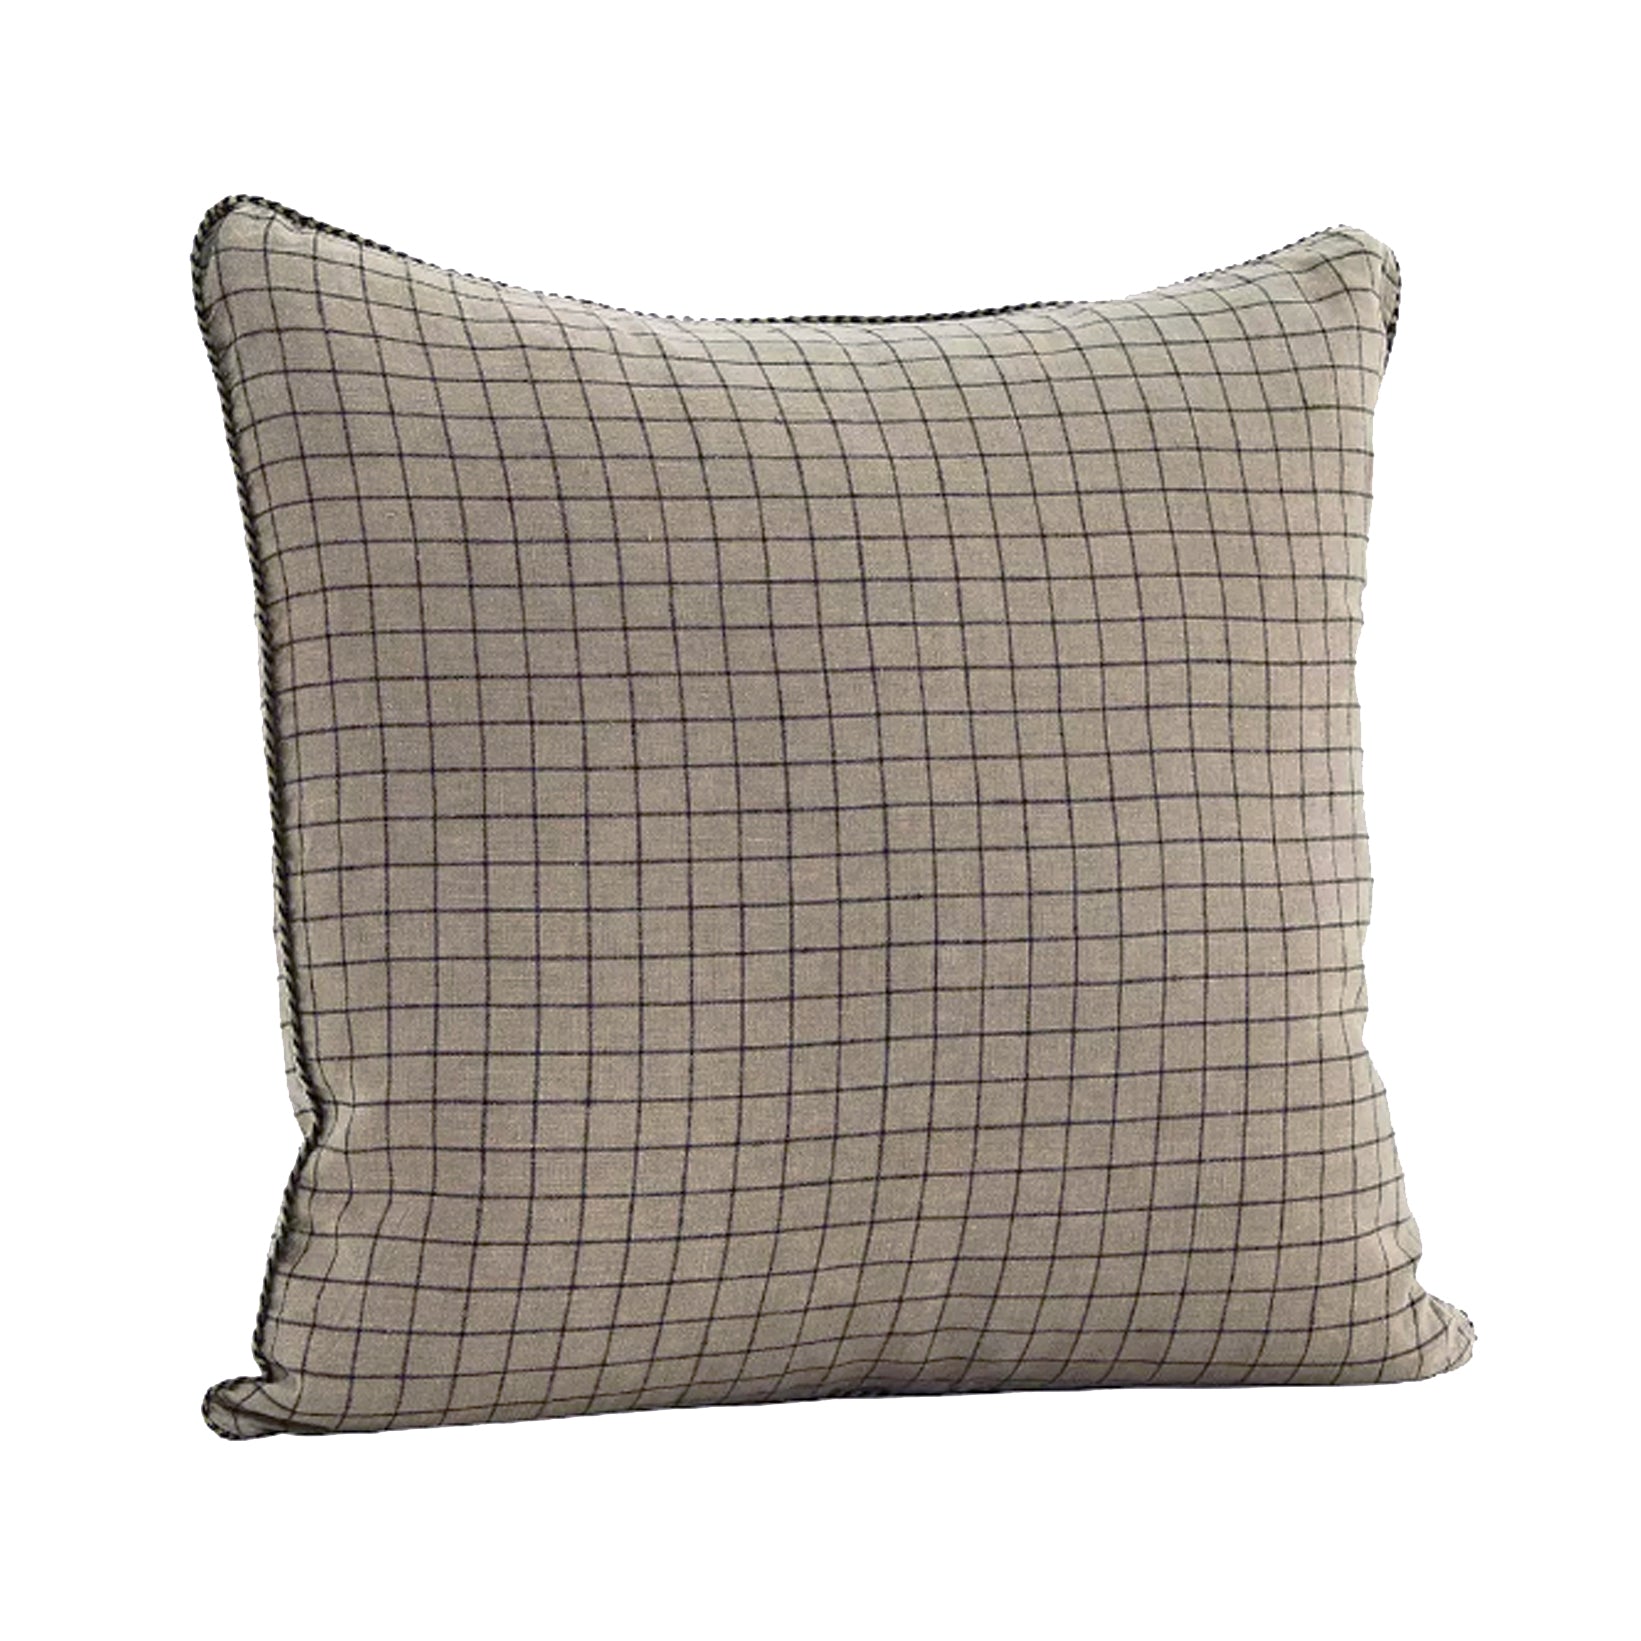 Checked Linen Cushion Cover - Taupe & Black